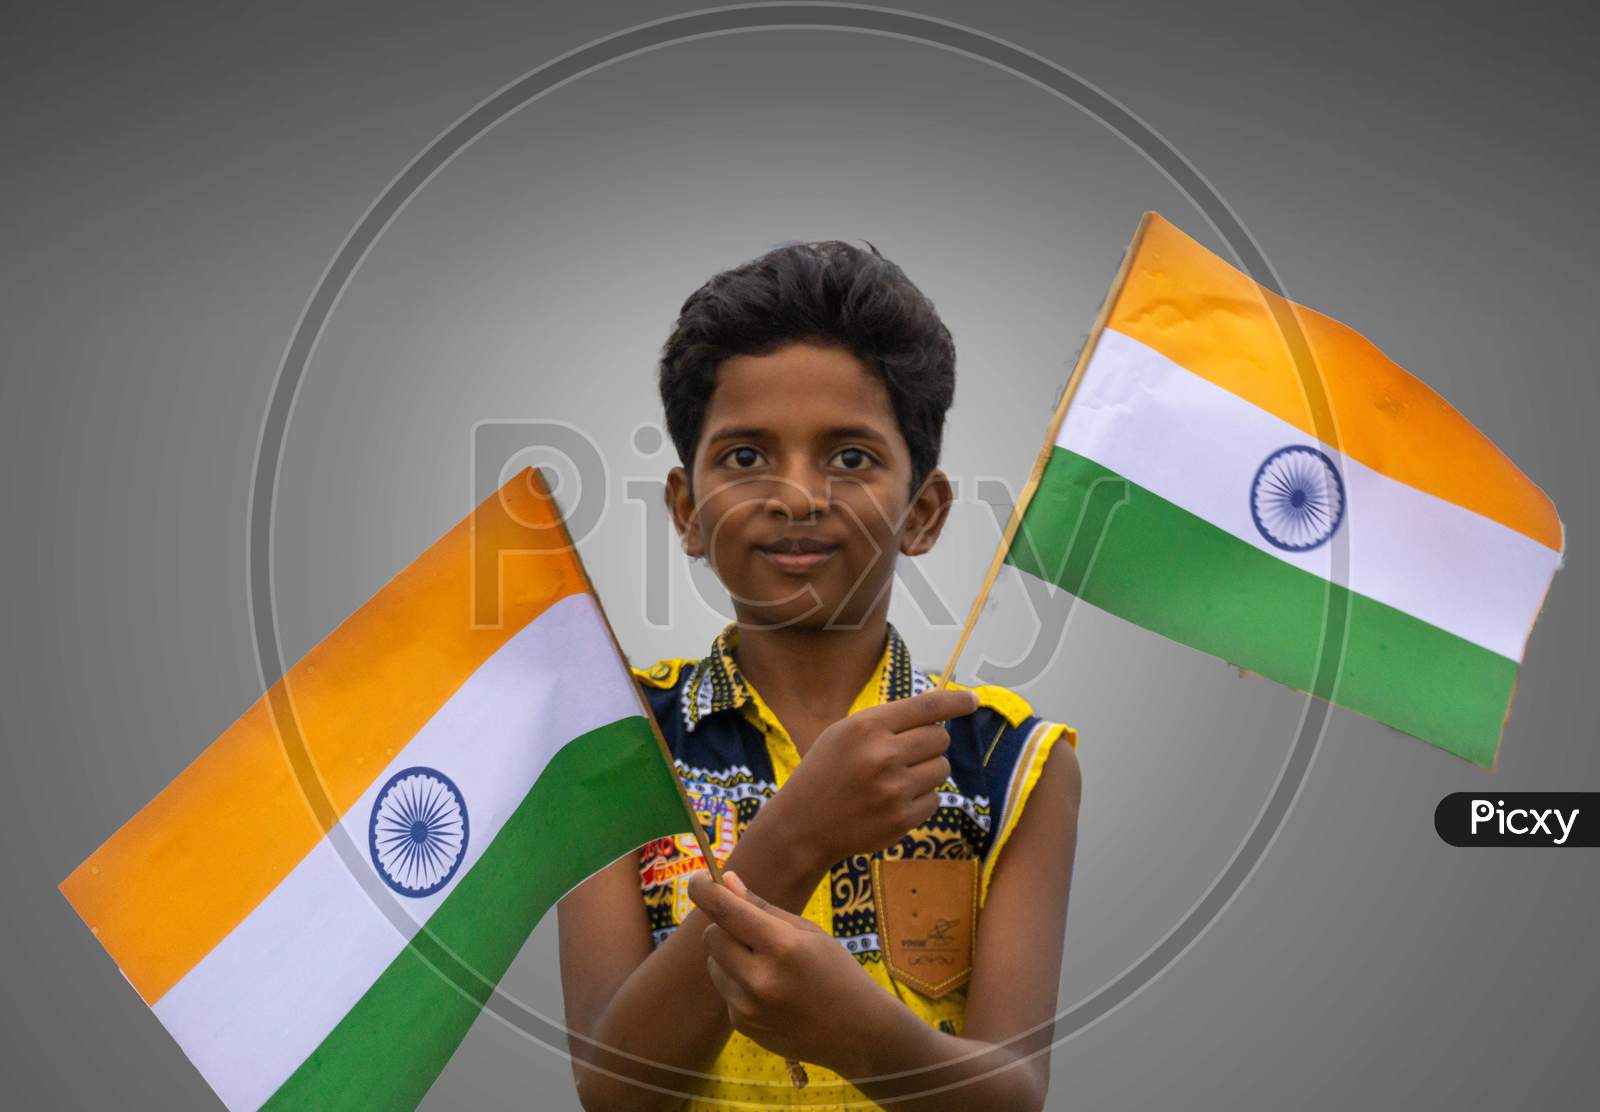 KID WEARING MASK AND HOLDING INDIAN FLAG